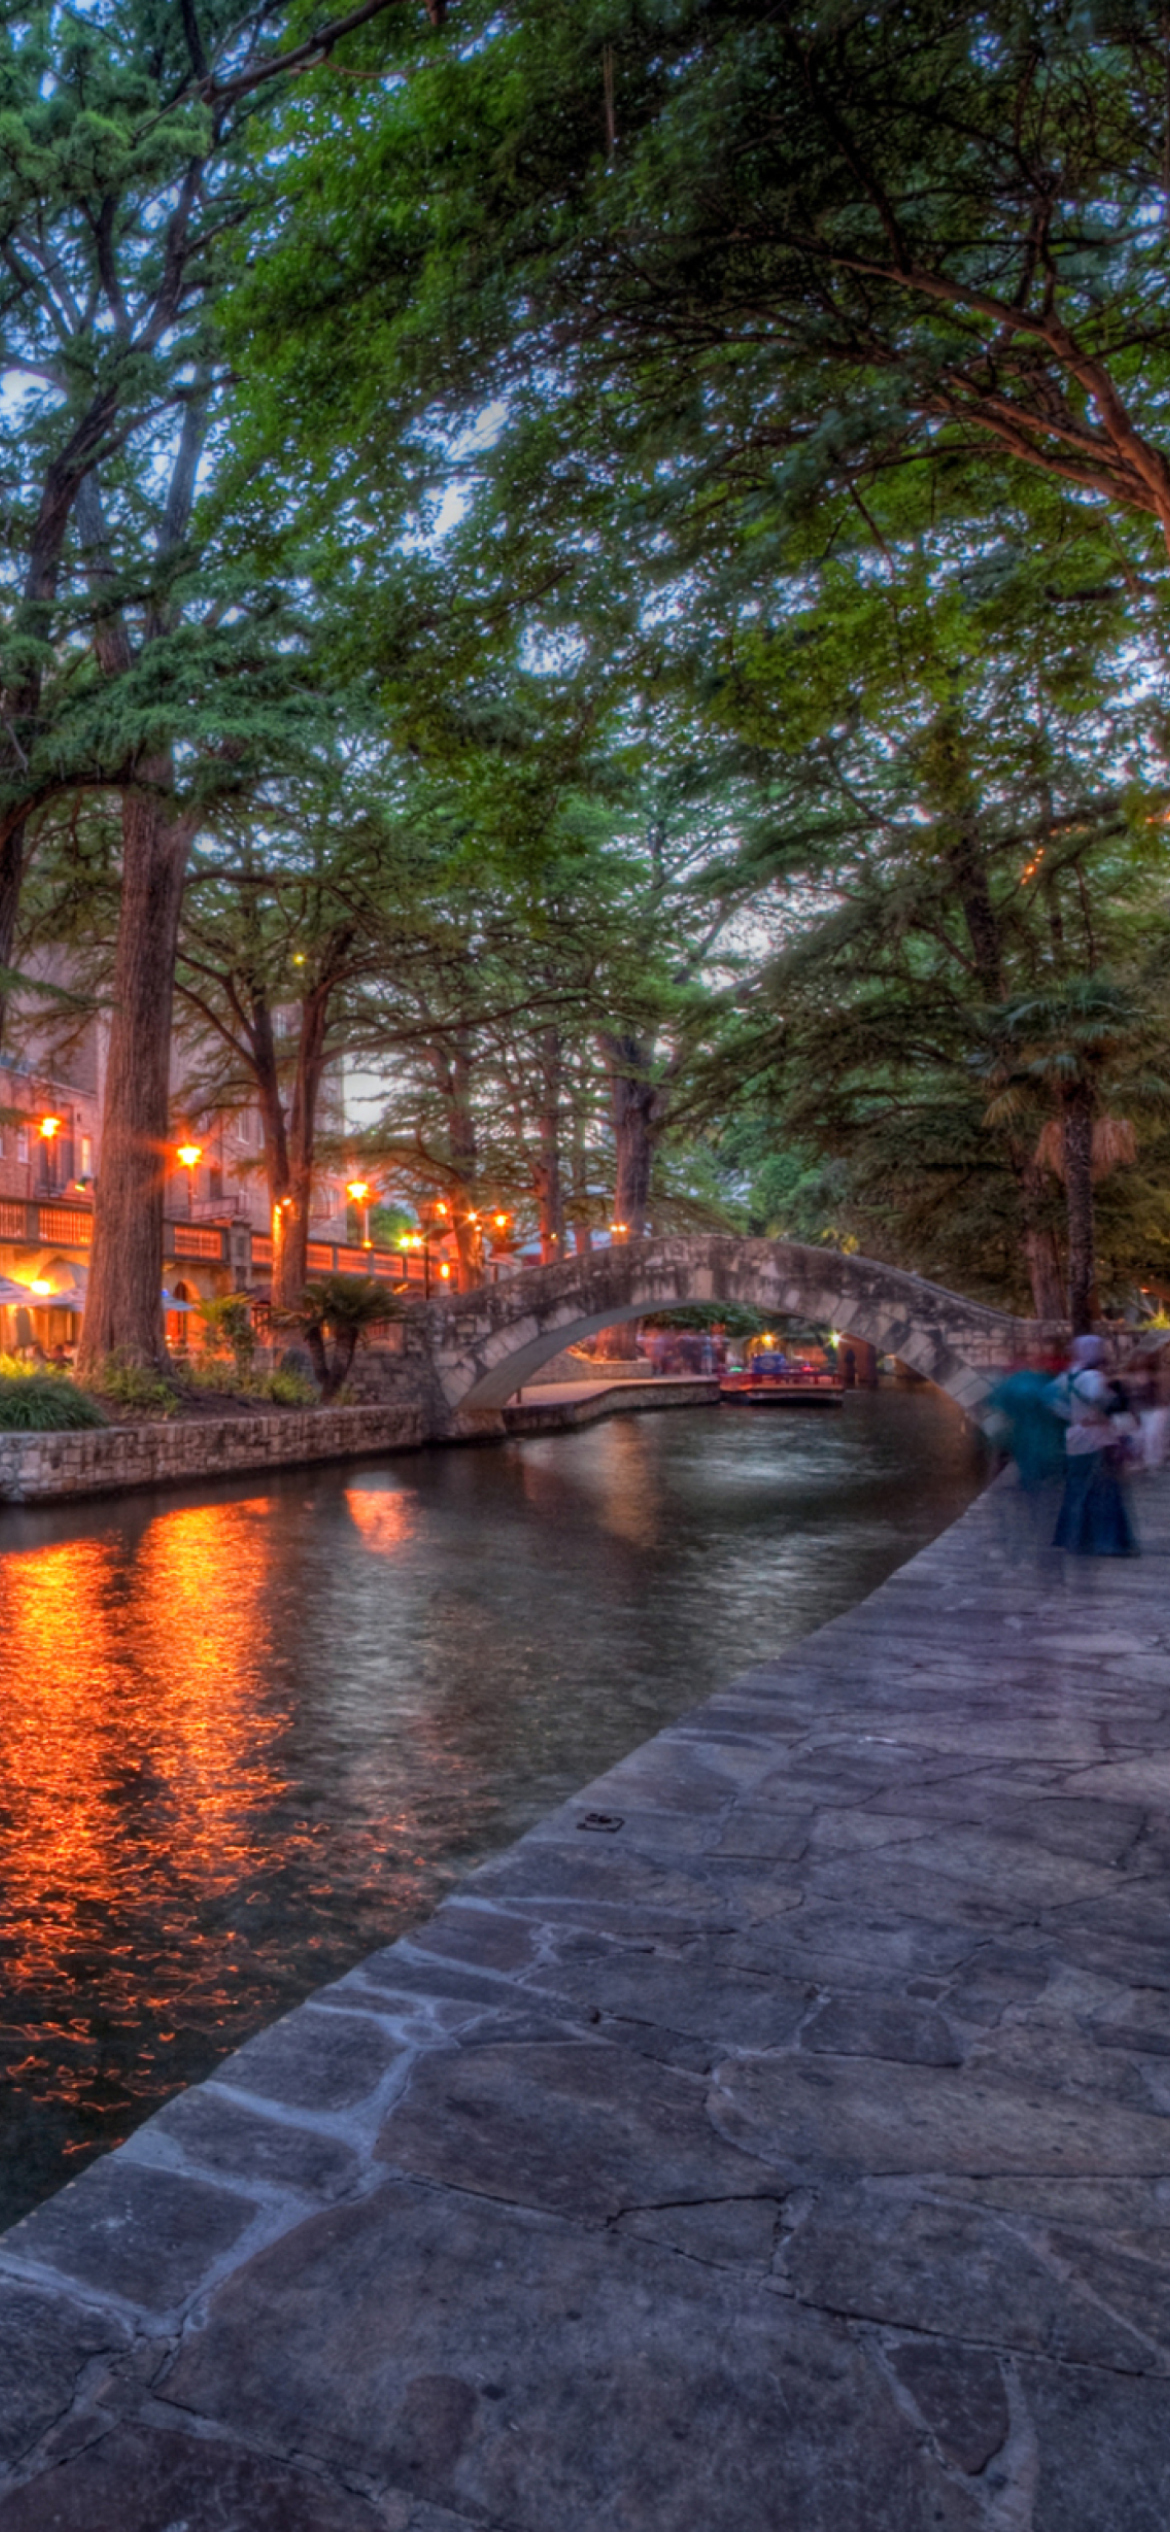 San antonio wallpapers hd desktop backgrounds images and pictures